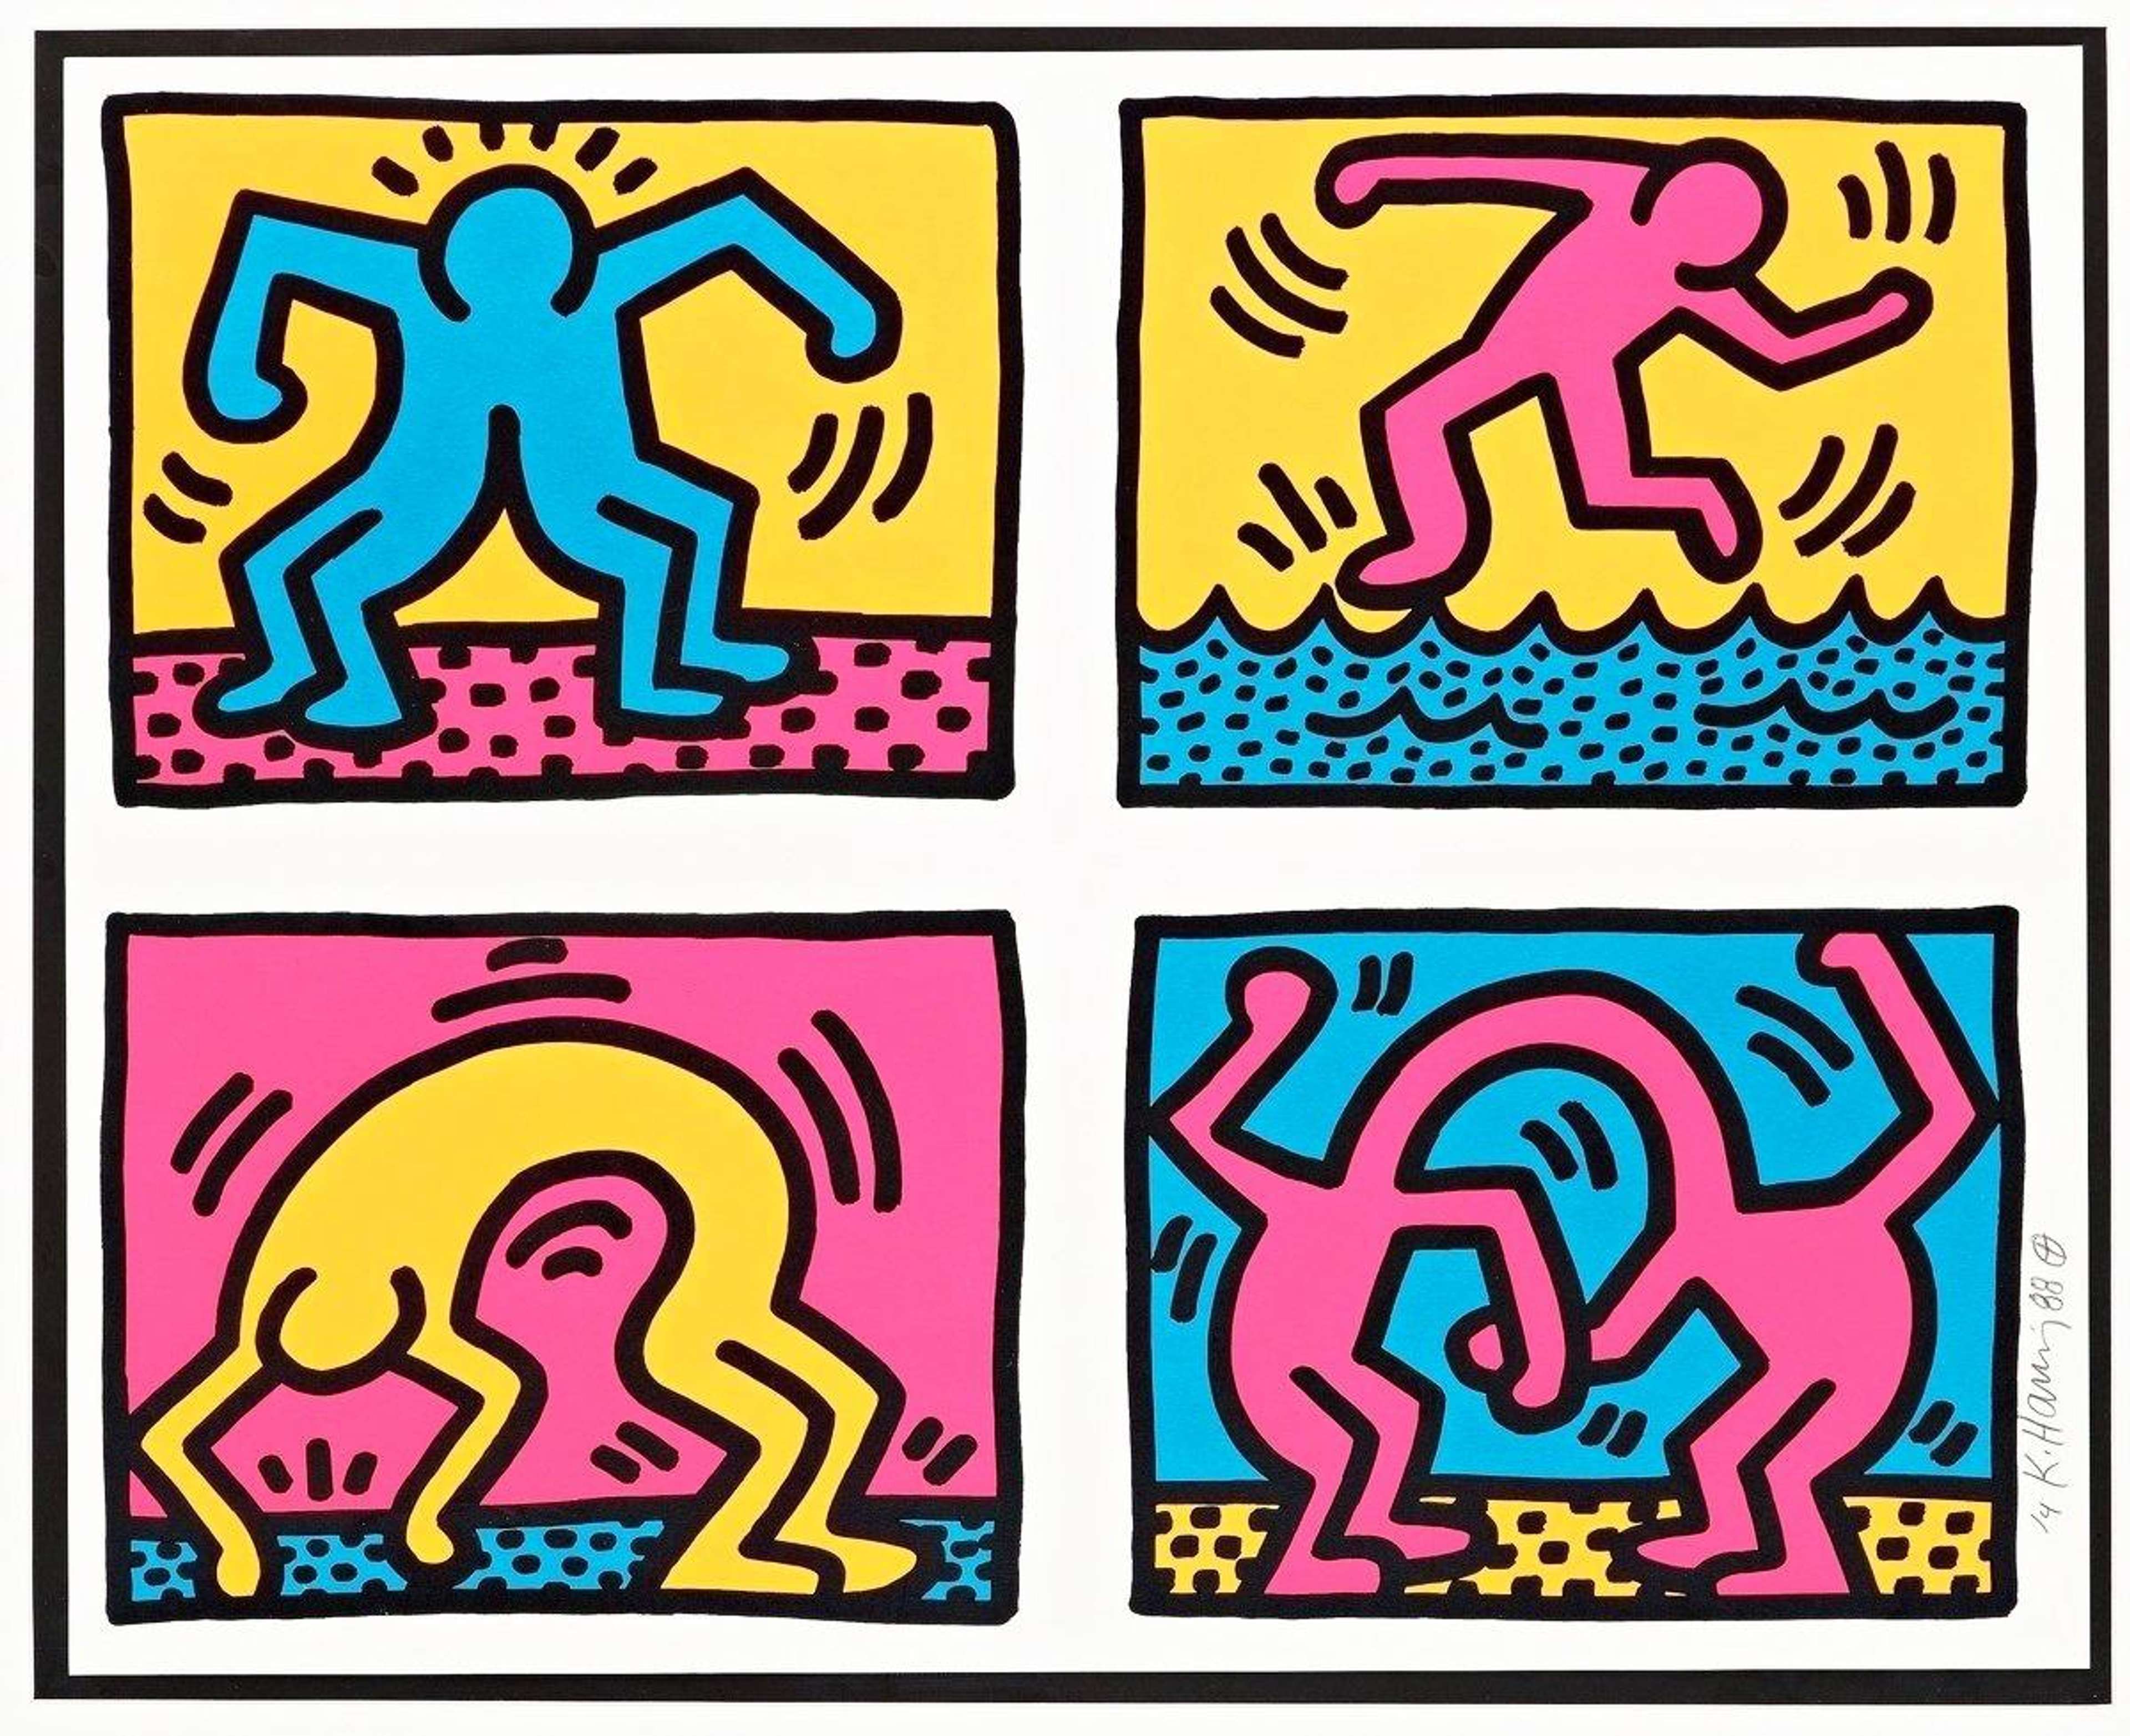 Pop Shop Quad II features Haring’s characteristically cartoonish figures in various states of ecstasy, whether joined at the head or bending over backwards surrounded by joyful energy lines. The thick black outlines are typical of Haring’s street art style.